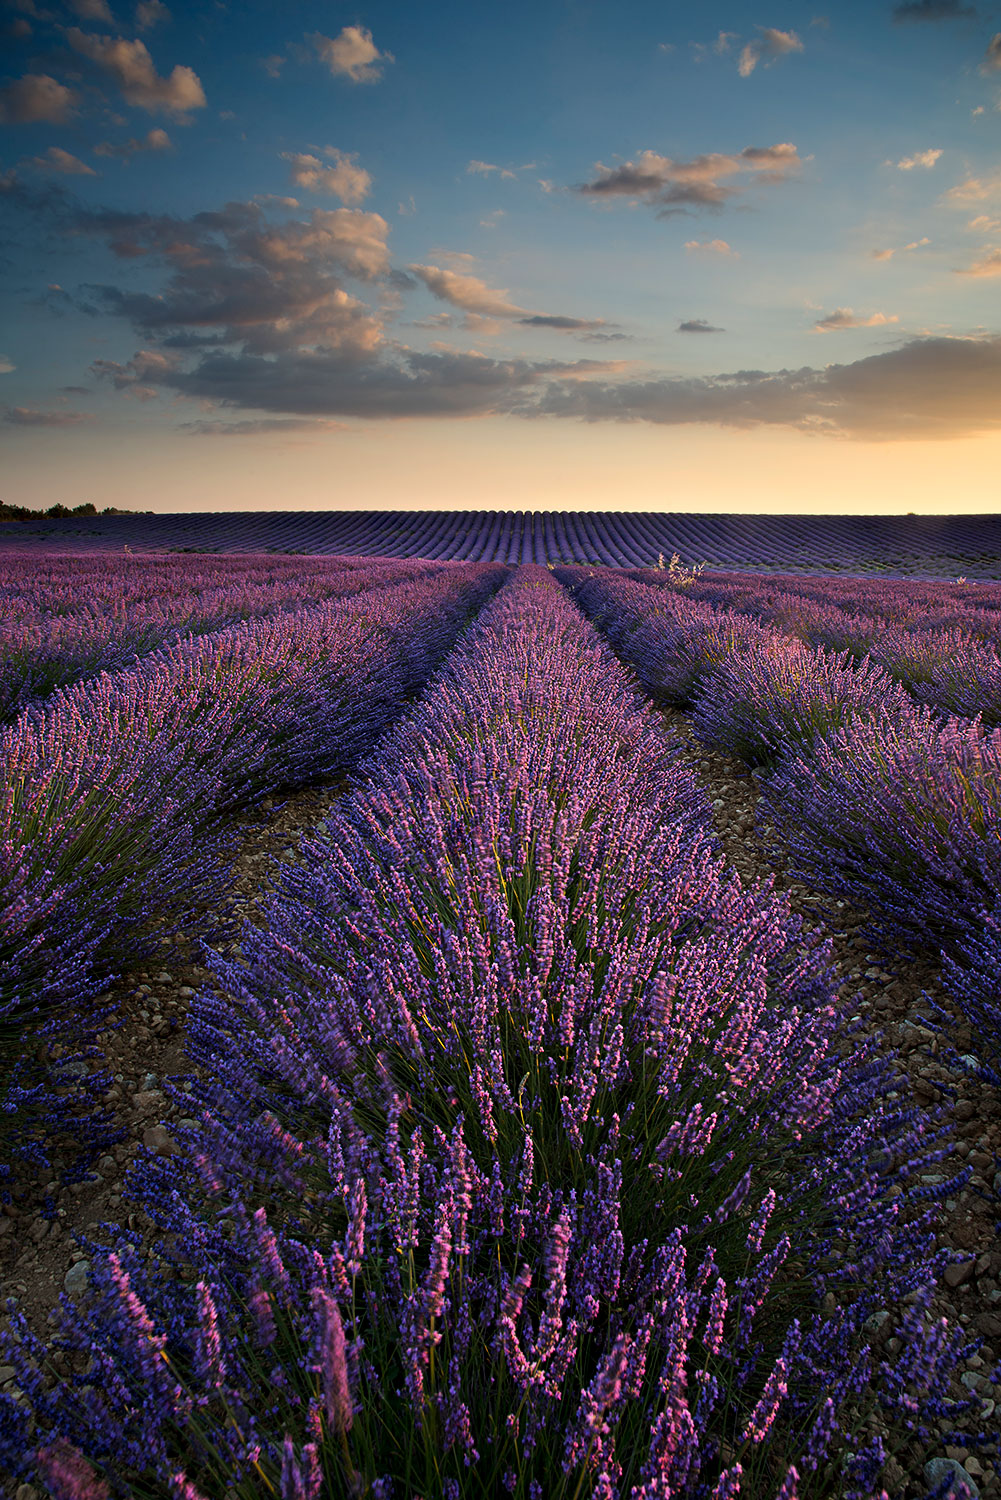 Lavender field at sunset...